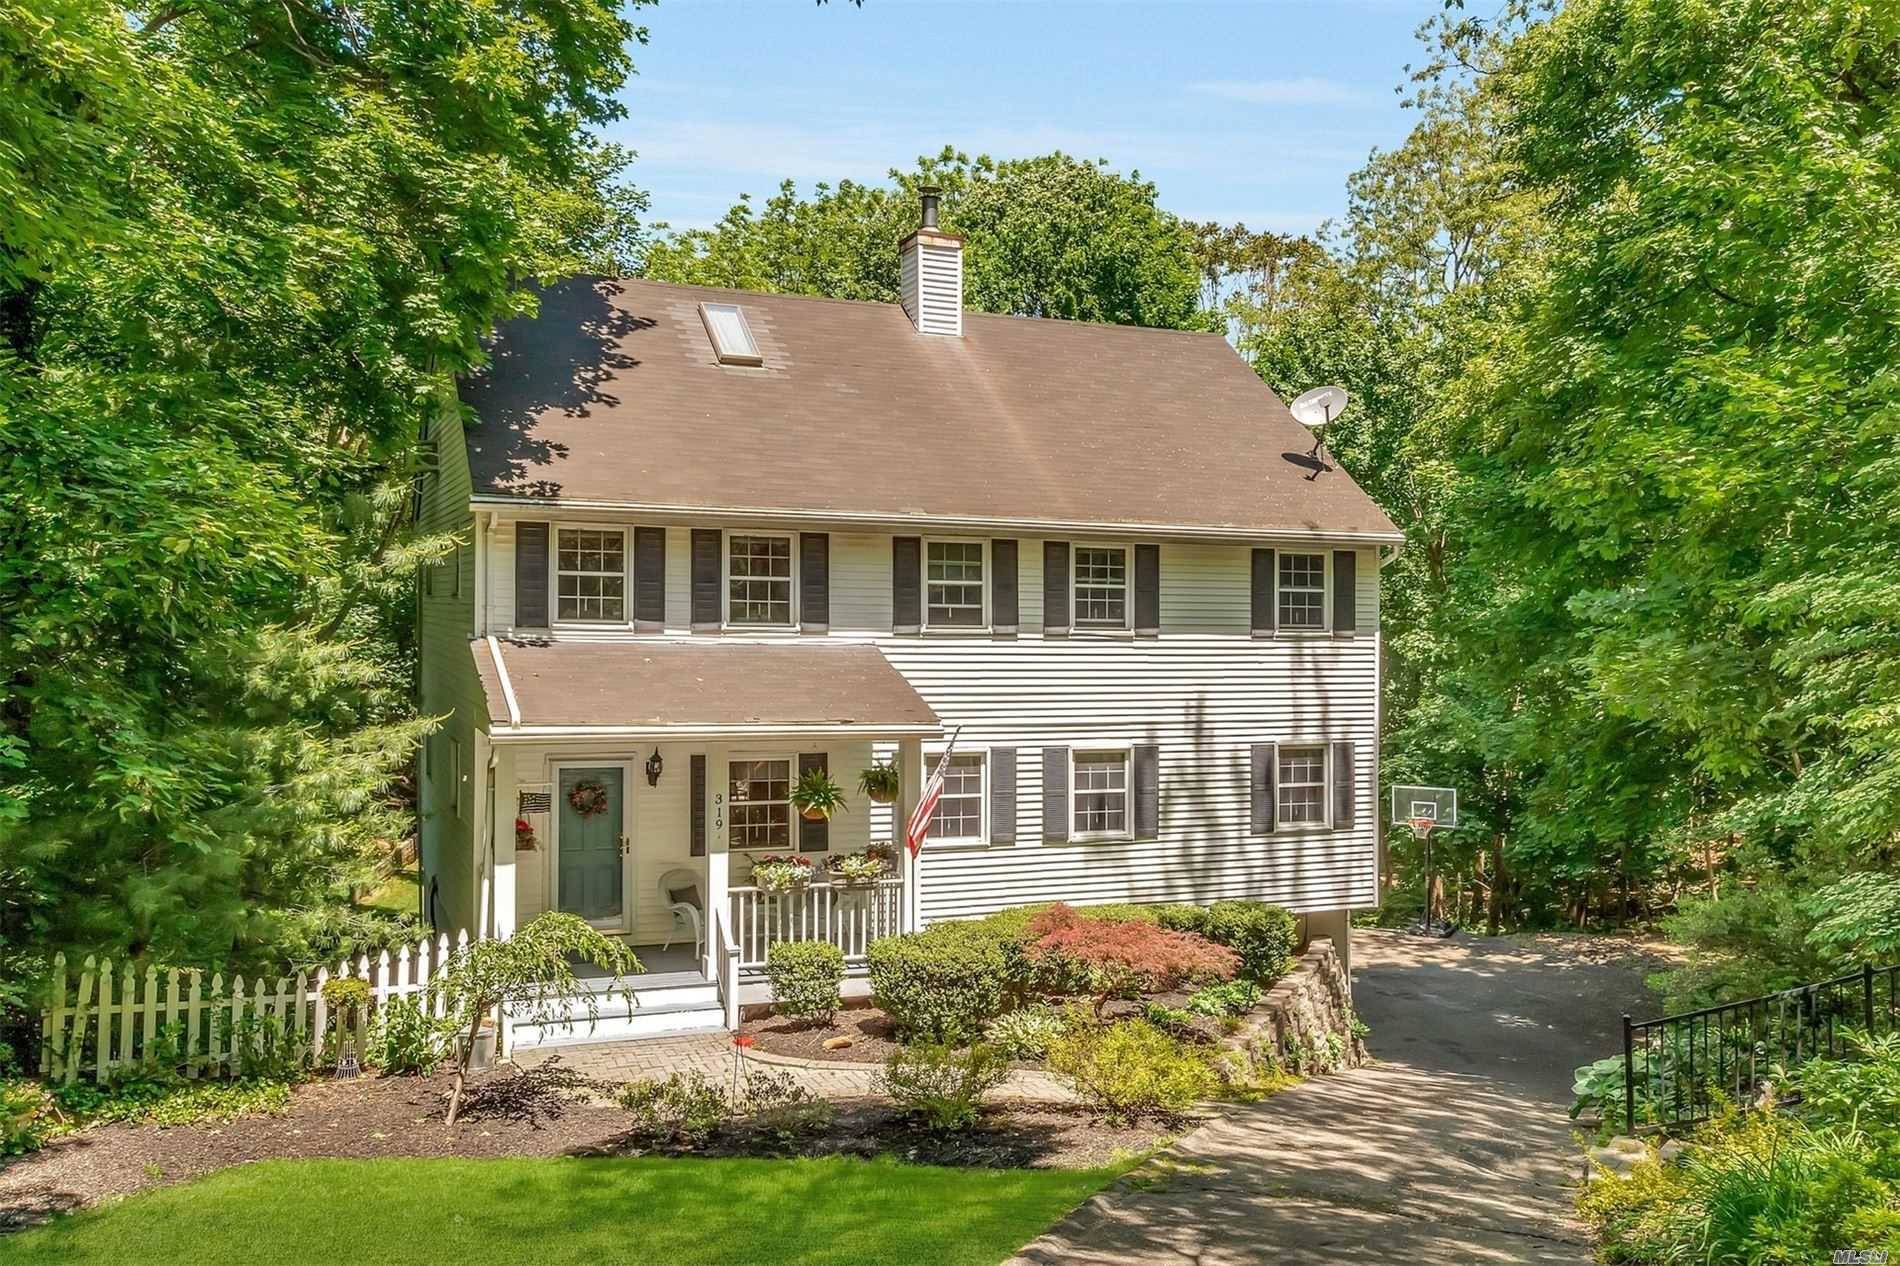 Younger colonial offers versatile floor plan, hardwood floors throughout and 4 levels of living space.